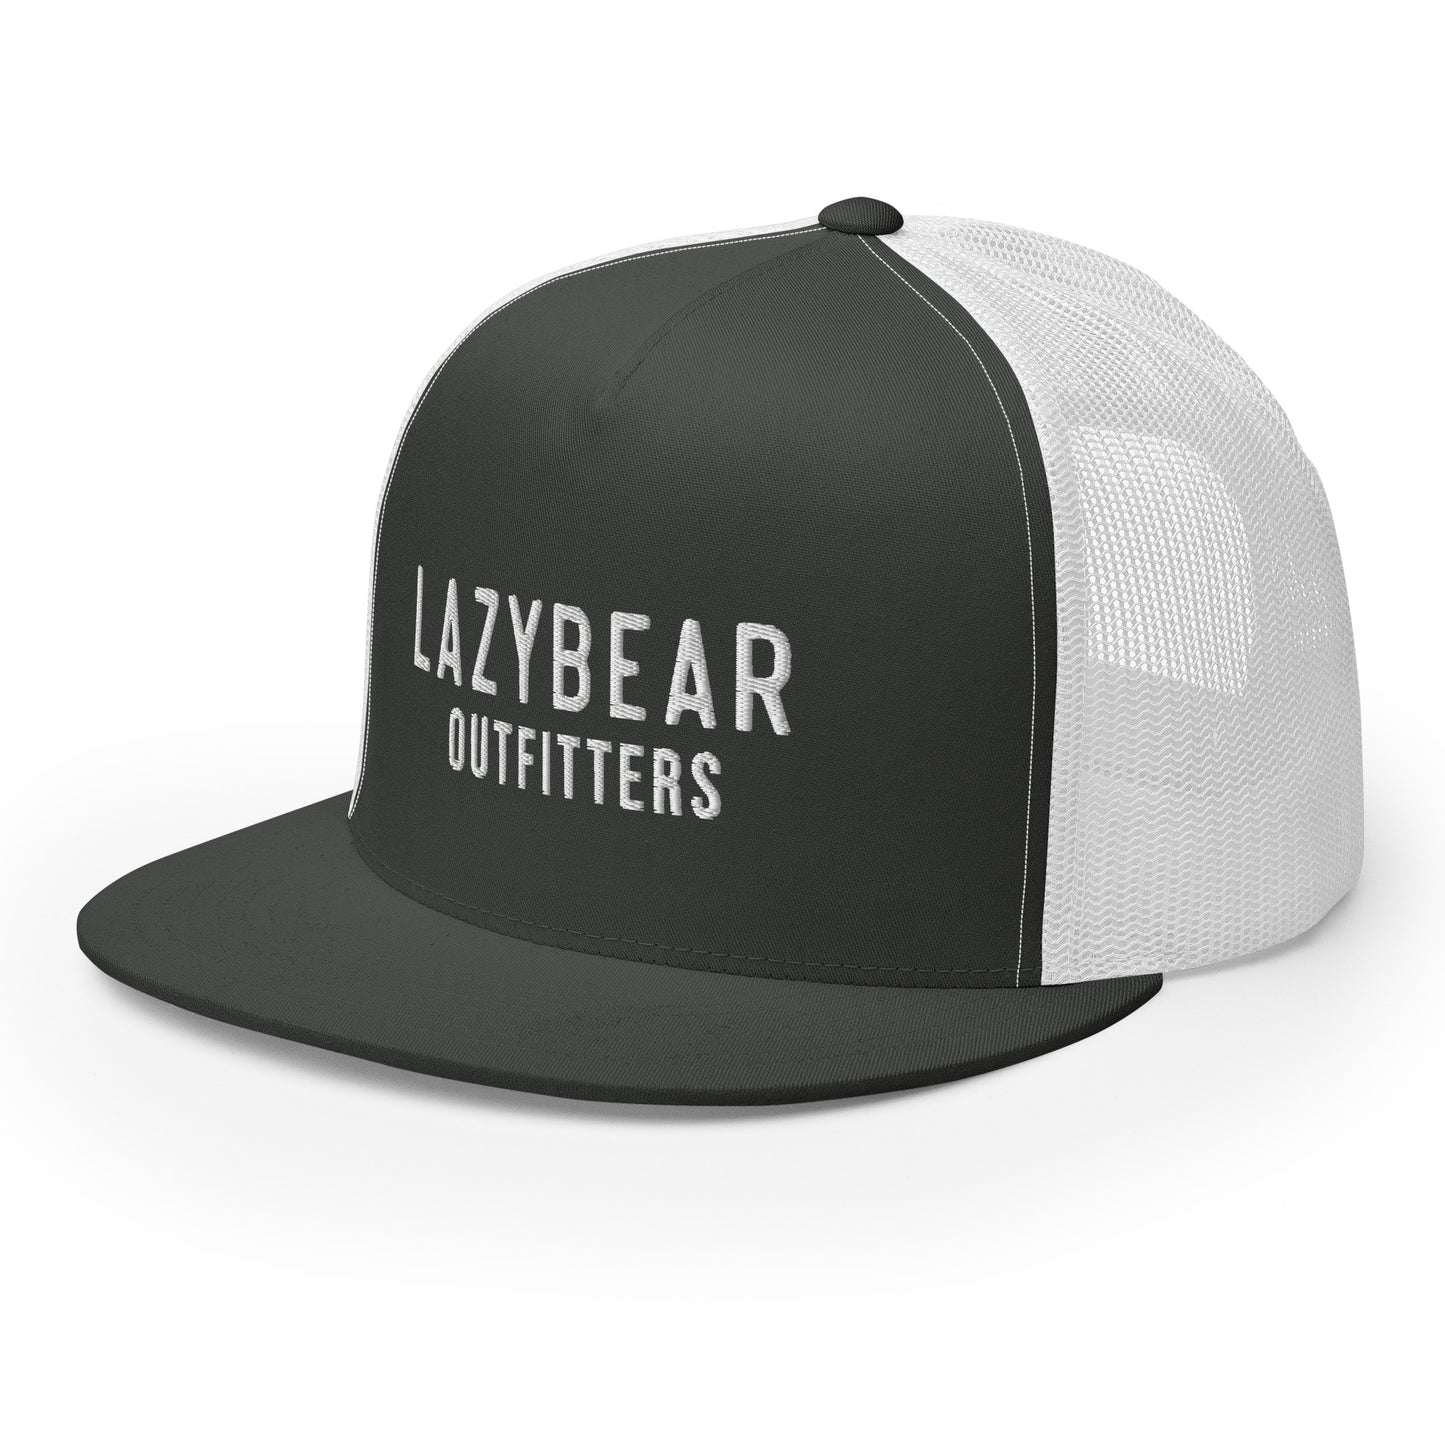 Lazy Bear Outfitters' Classic Embroidered Trucker Hat